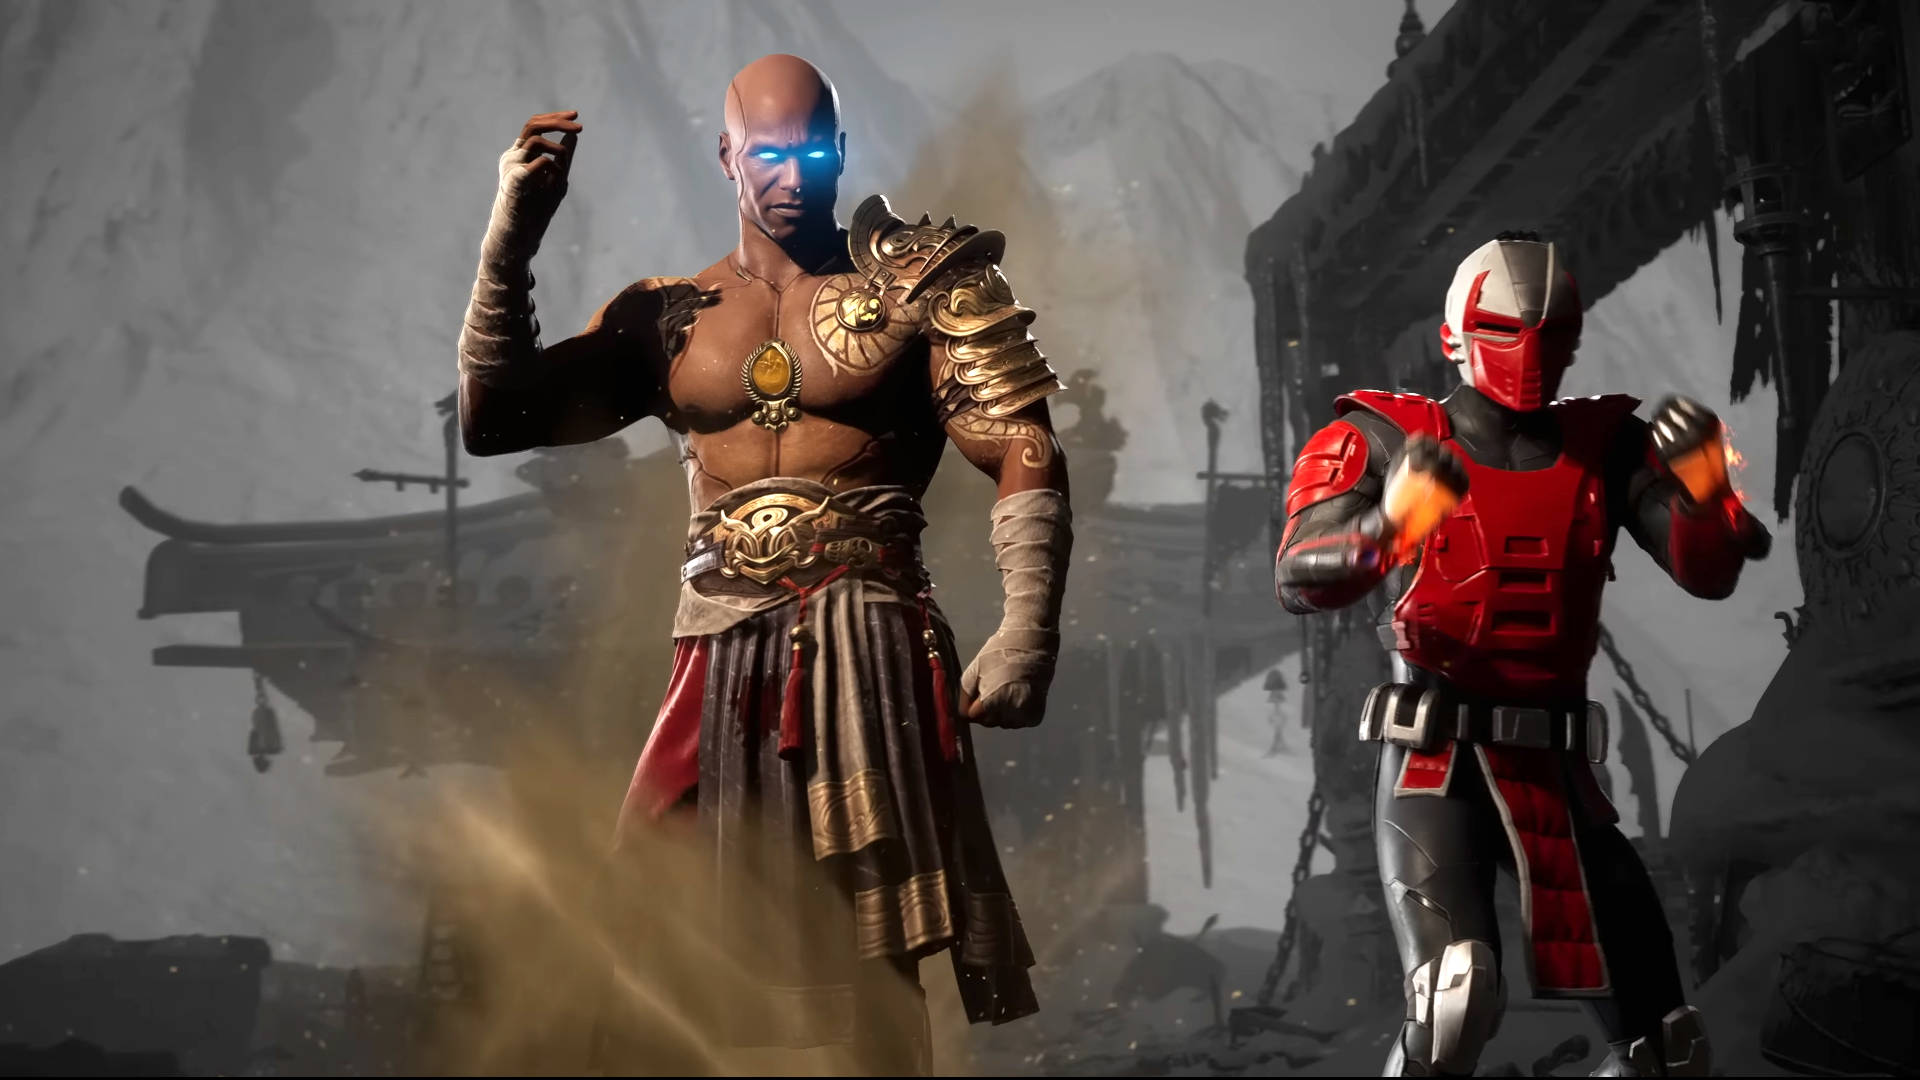 How to get Mortal Kombat 1 early access – start time